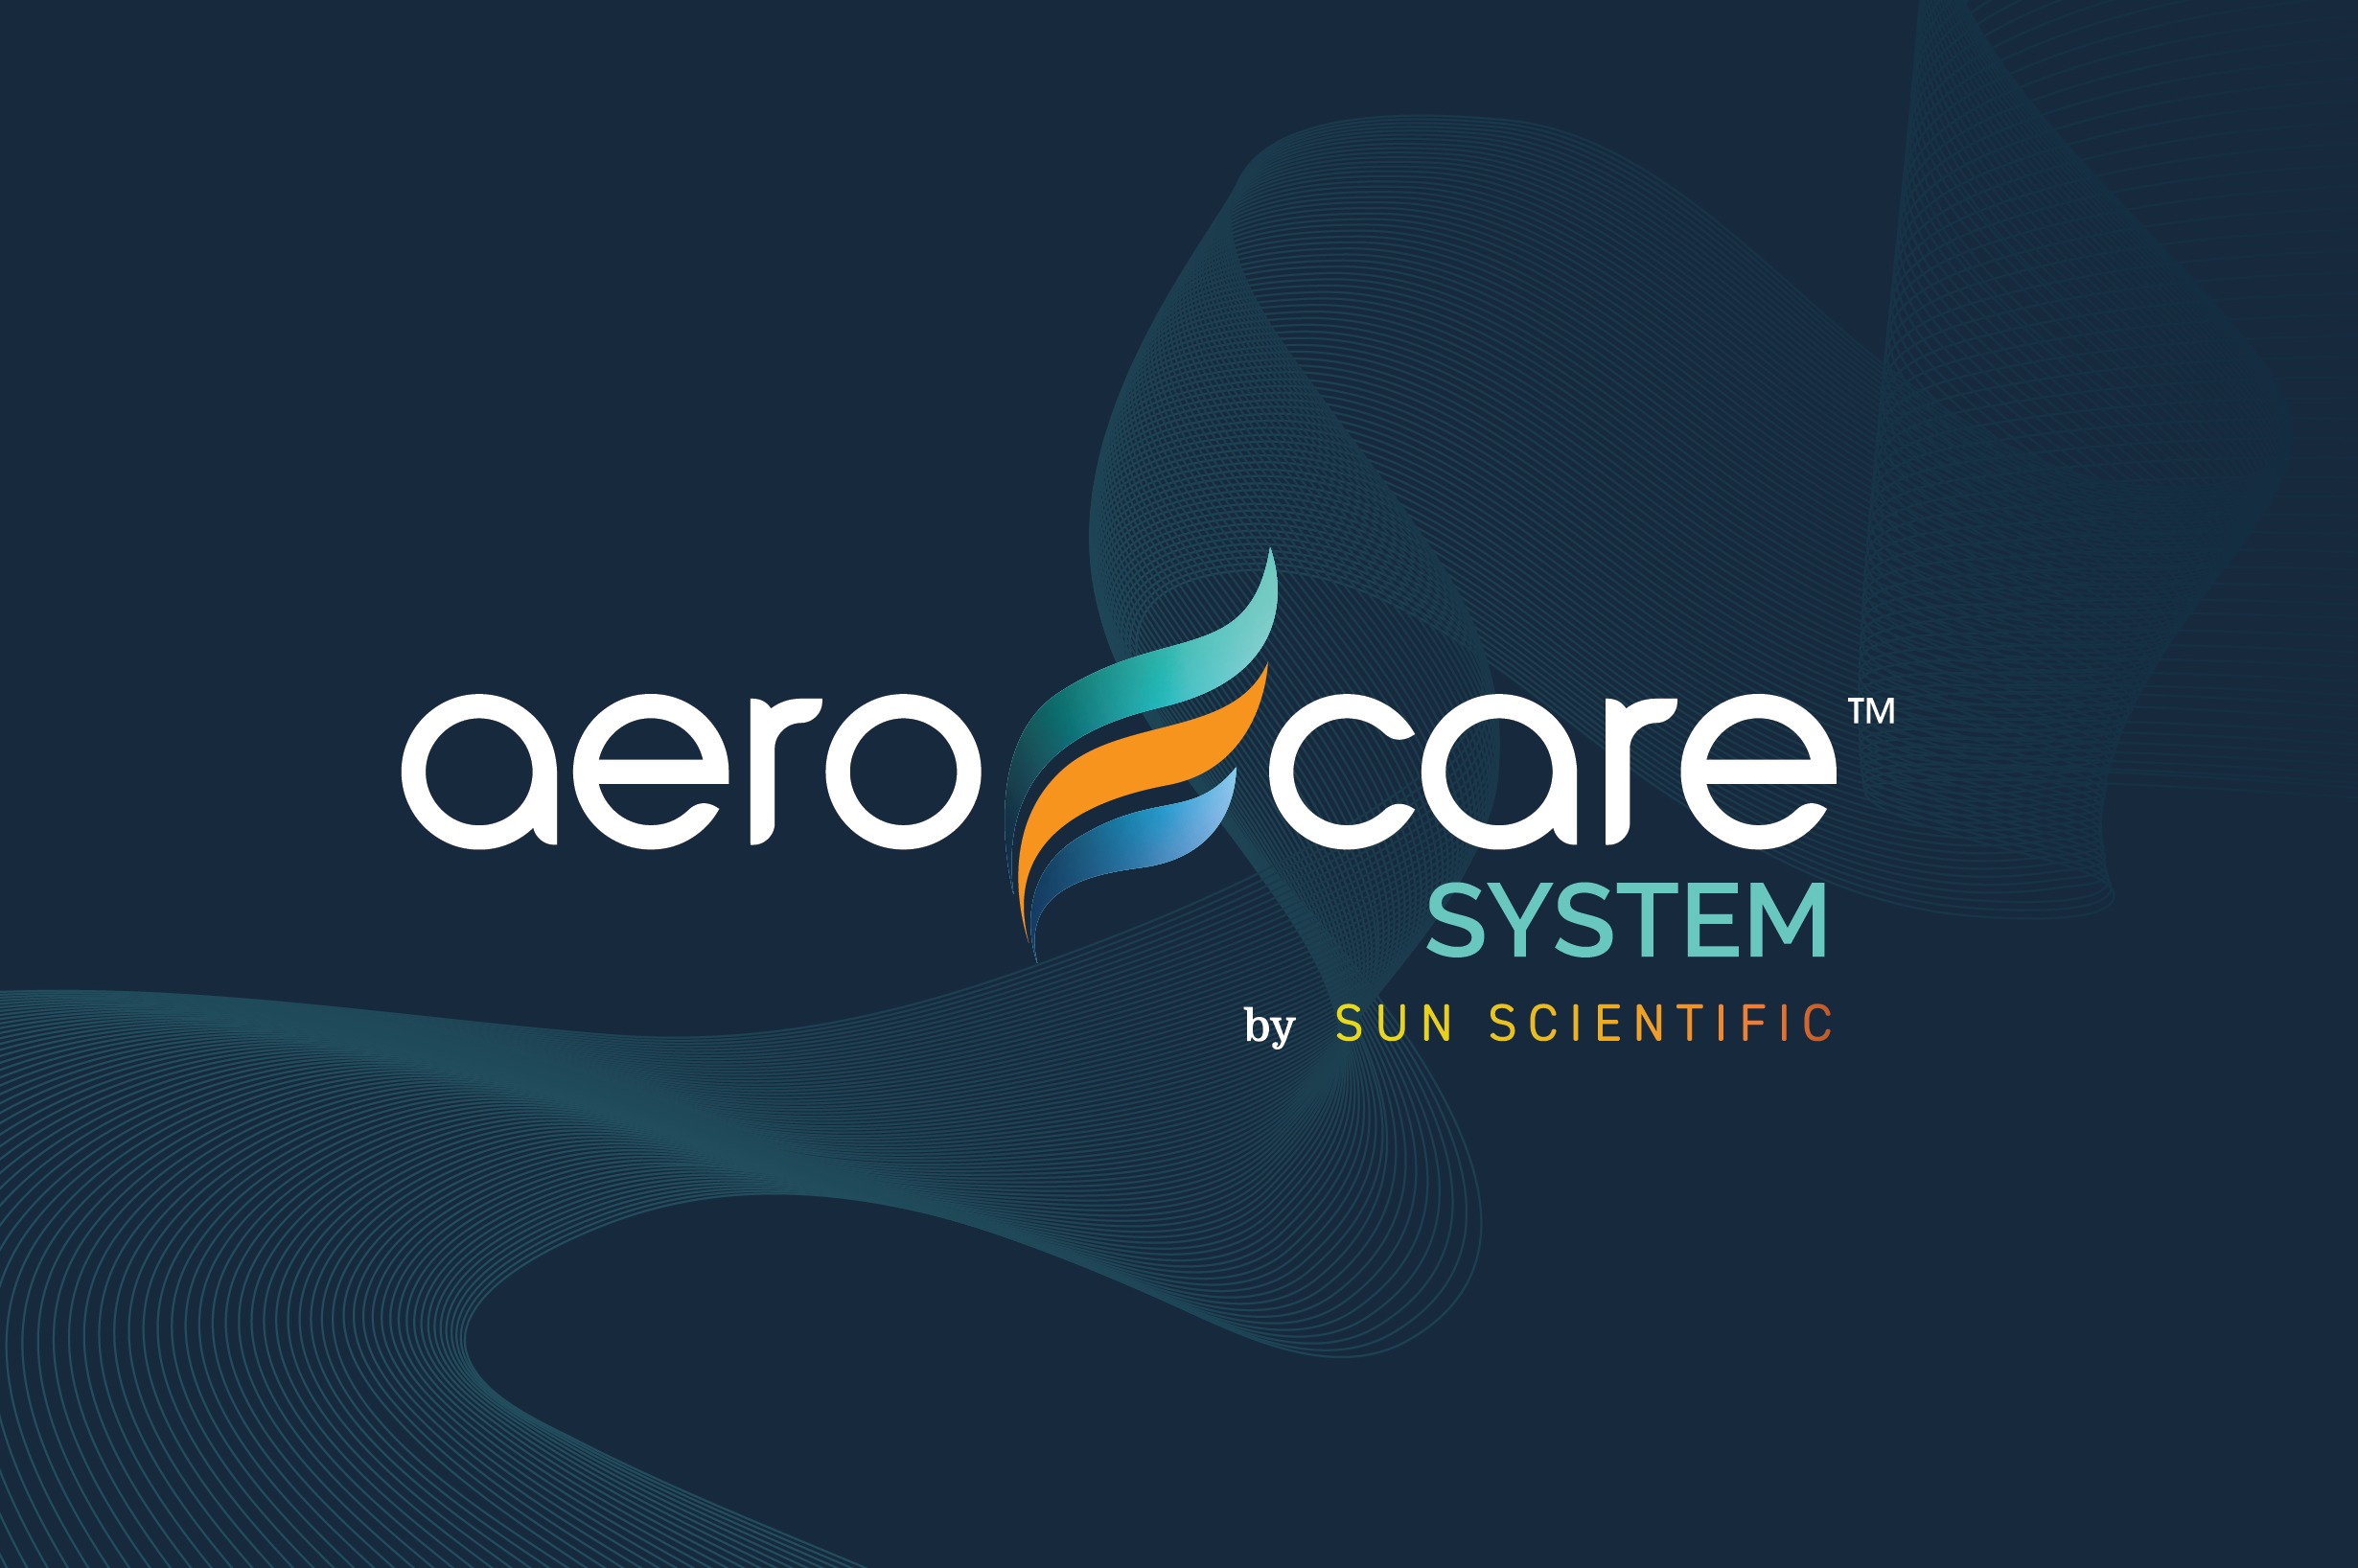 Load video: AeroCare System for venous leg ulcer treatment